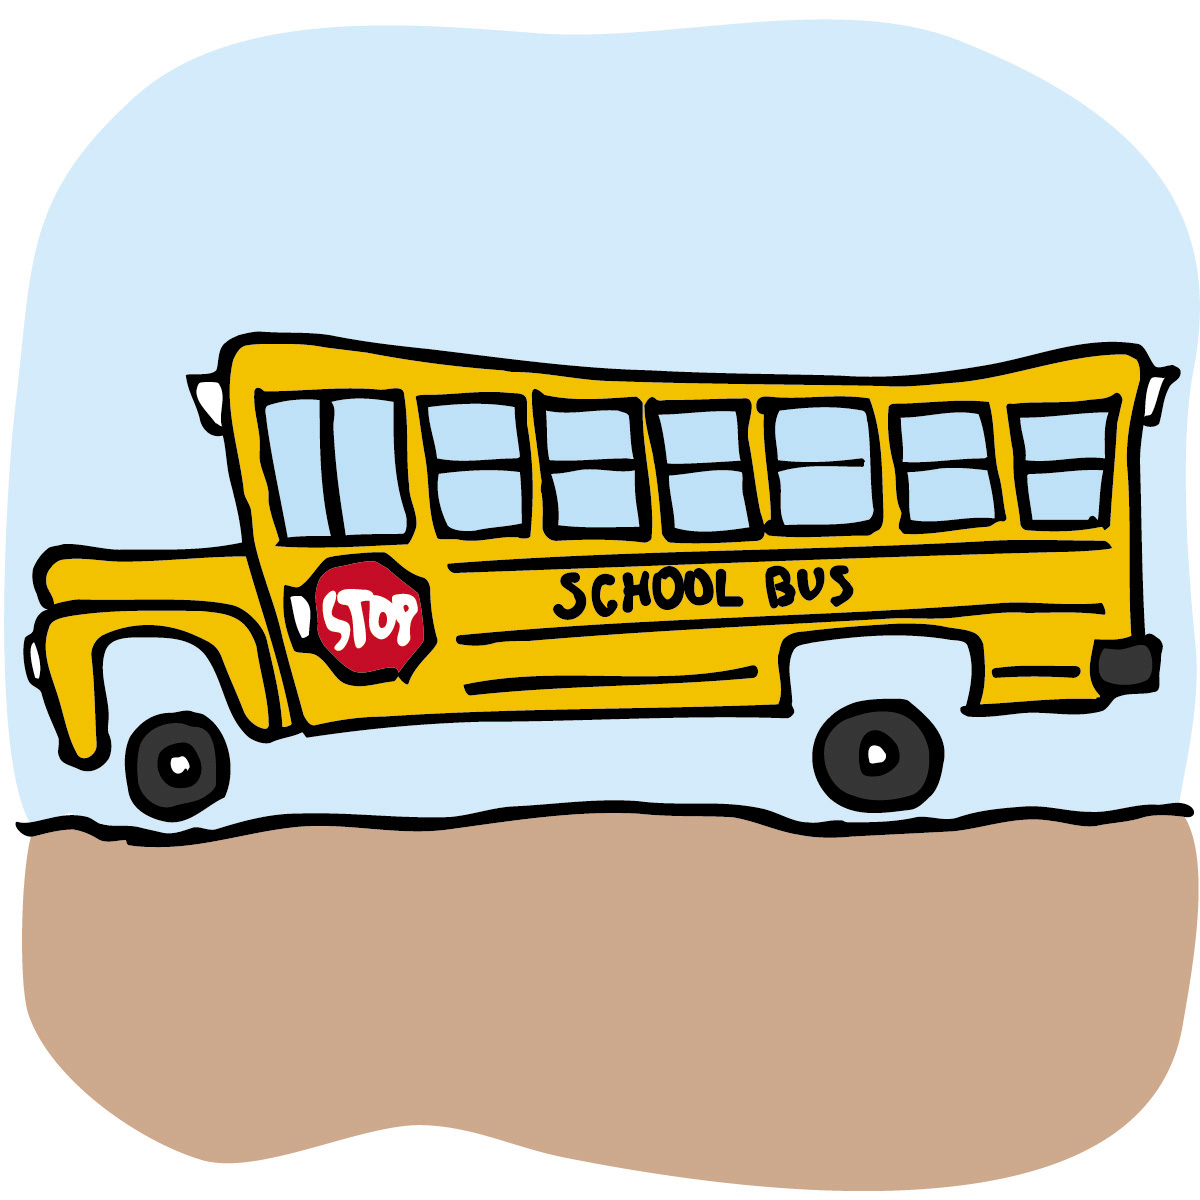 Clip Art For School Bus | Clipart library - Free Clipart Images